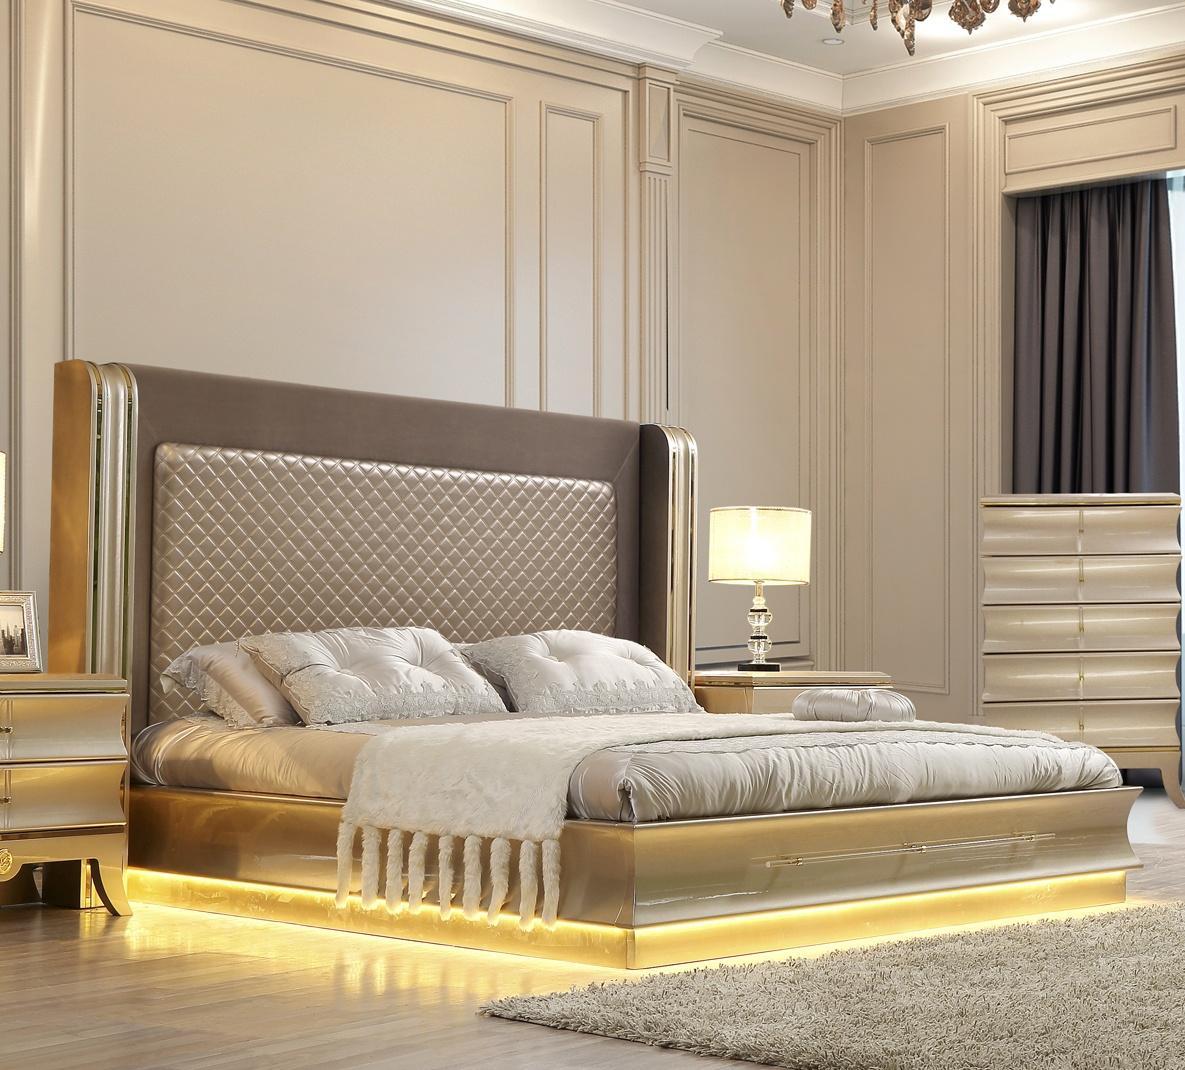 

    
Glam Belle Silver & Gold King Bedroom Set 5Pcs Contemporary Homey Design HD-925
